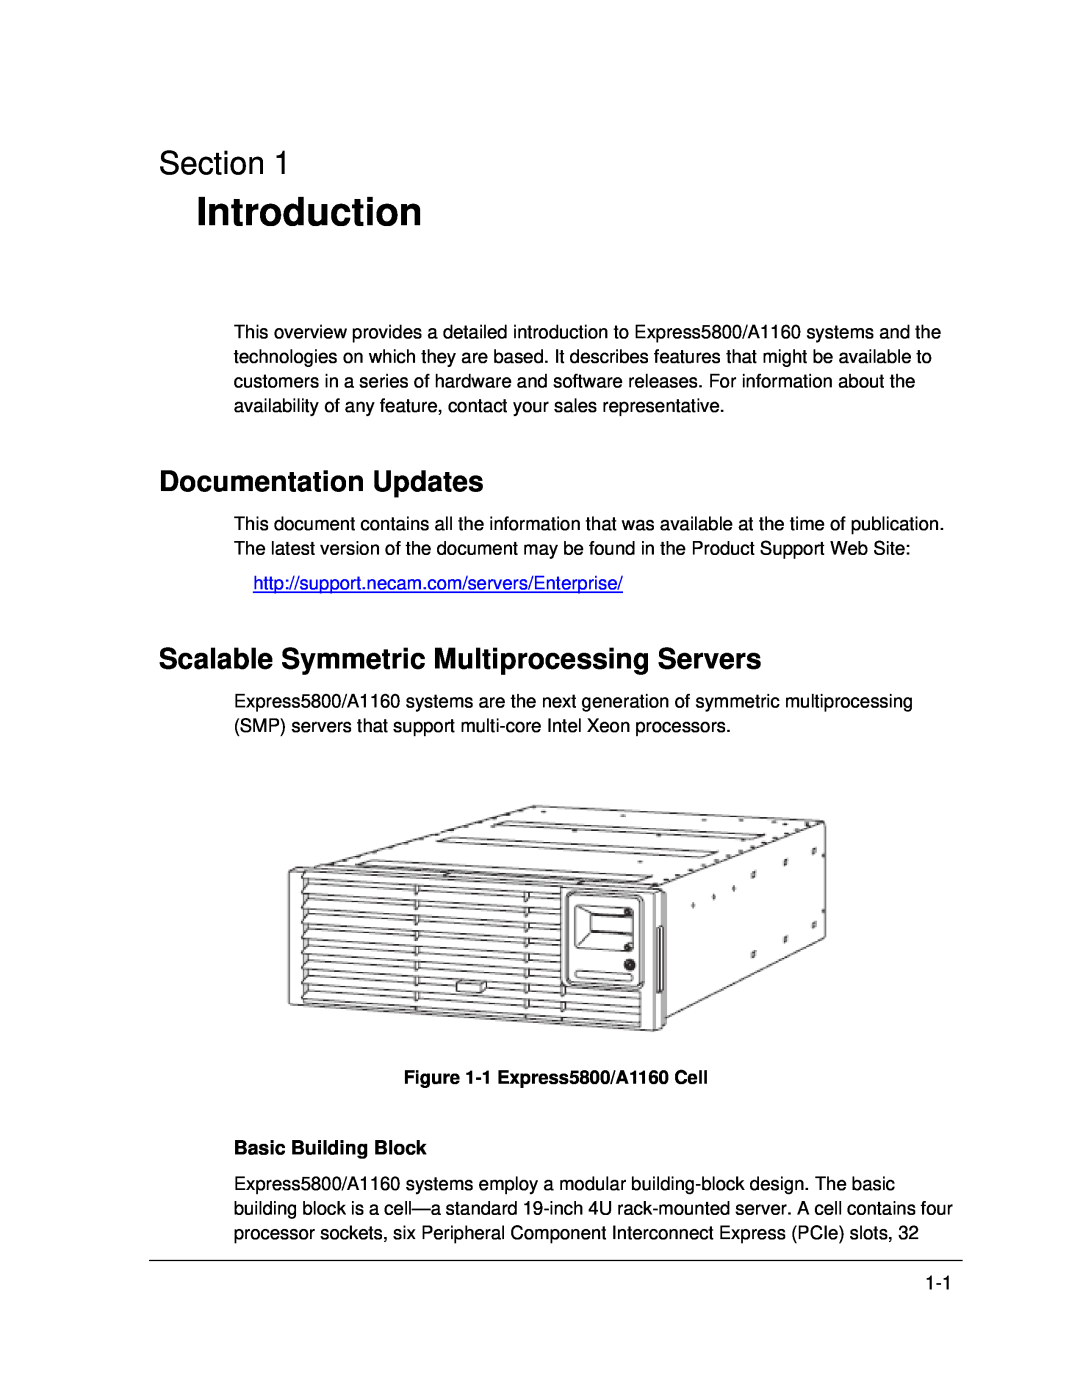 NEC A1160 Introduction, Section, Documentation Updates, Scalable Symmetric Multiprocessing Servers, Basic Building Block 